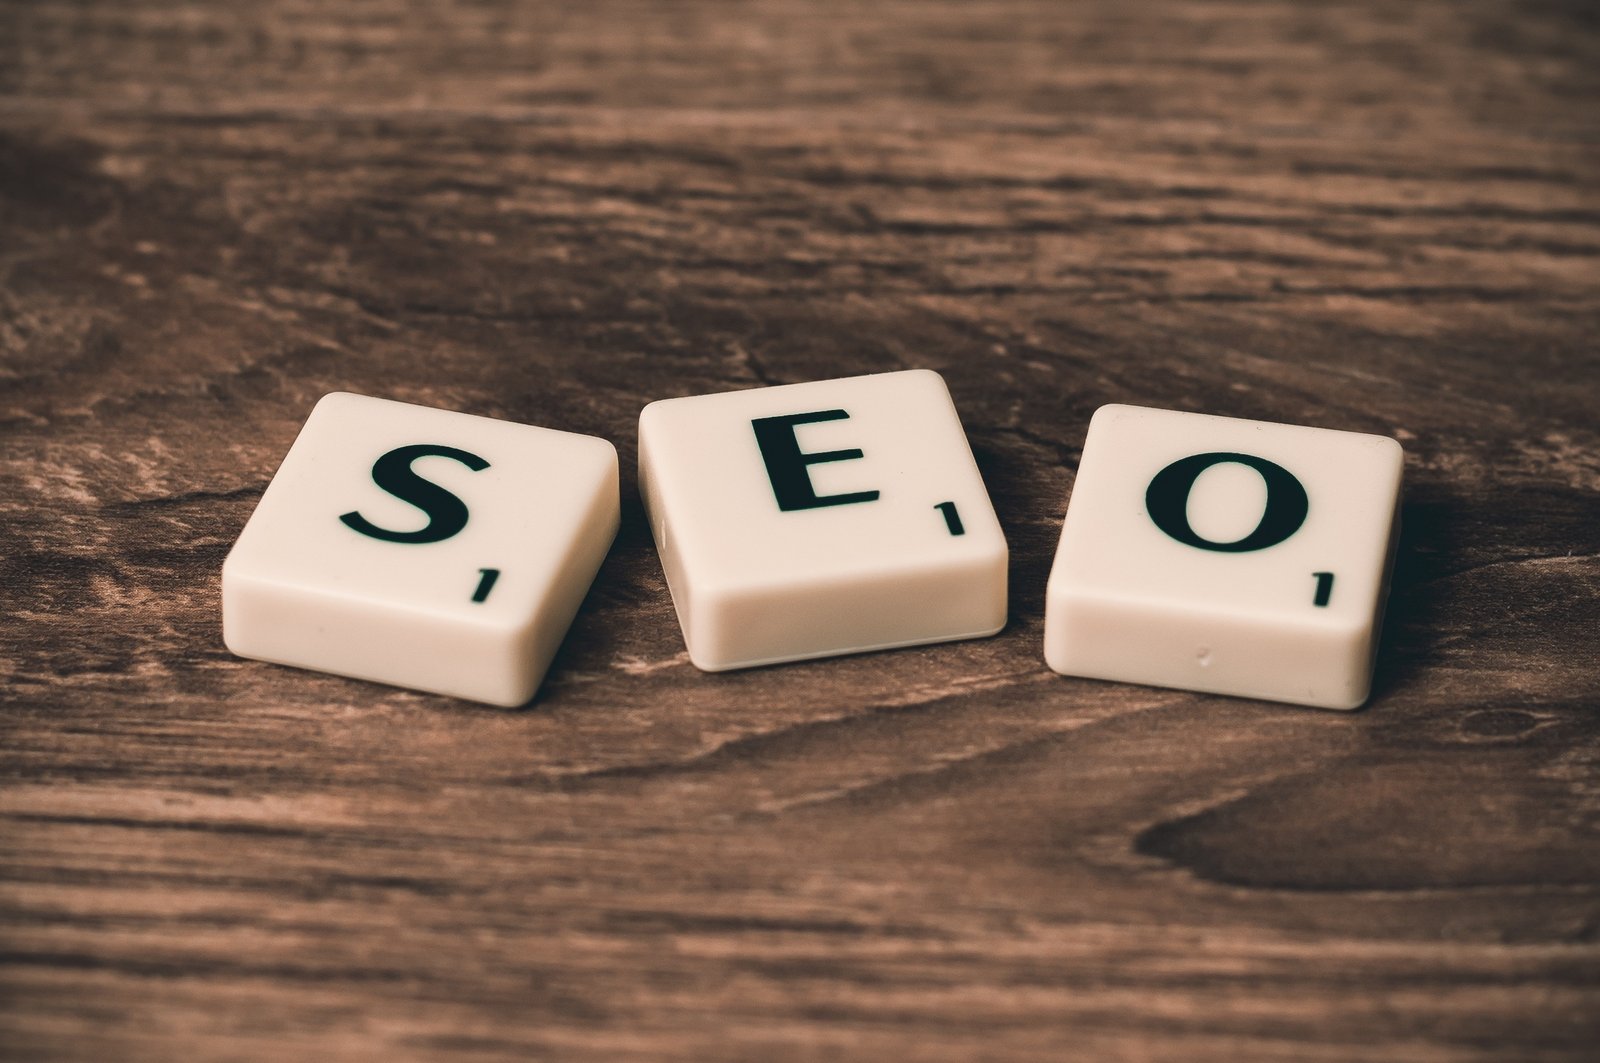 getting started with seo